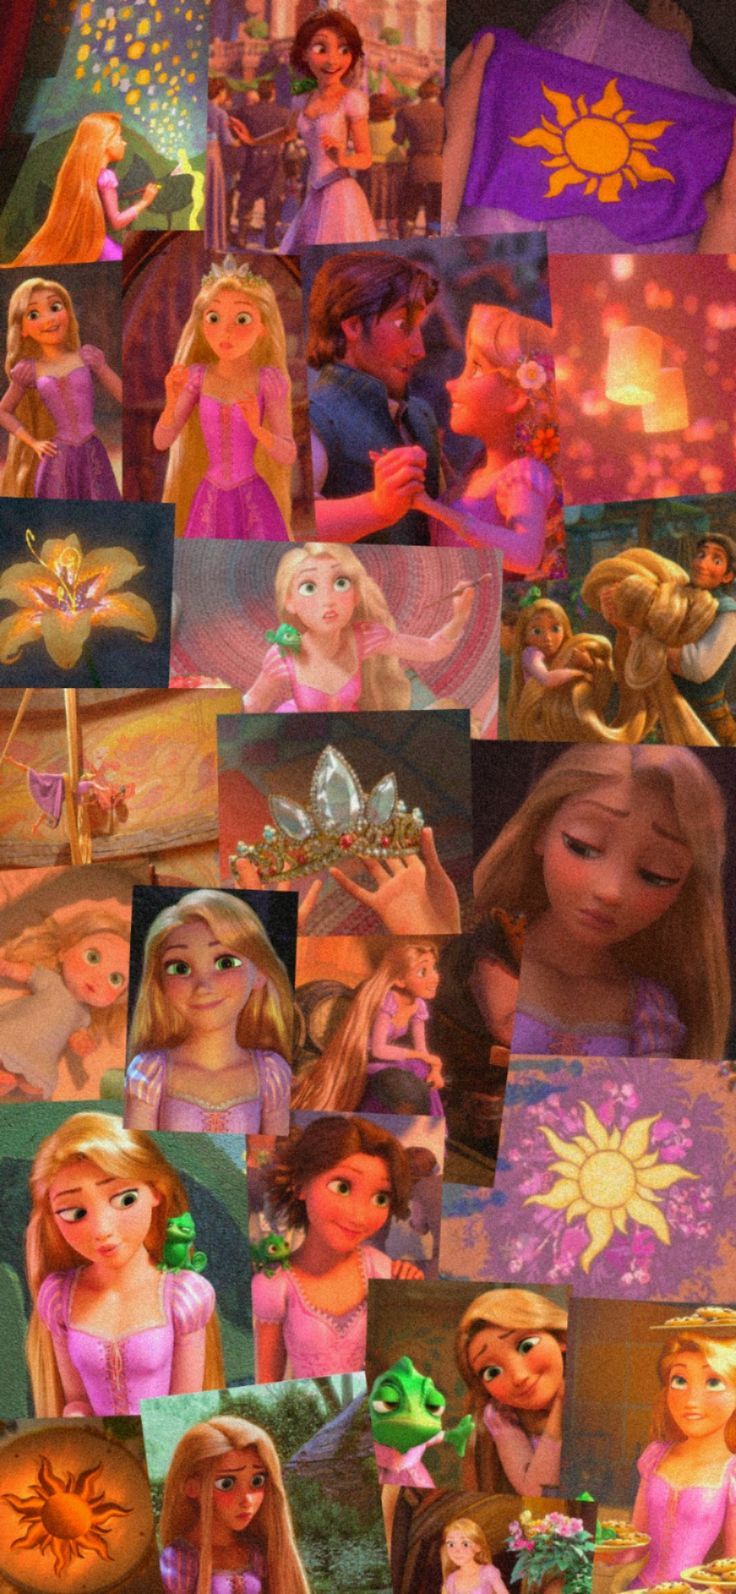 A collage of Rapunzel from the Disney movie Tangled. - Rapunzel